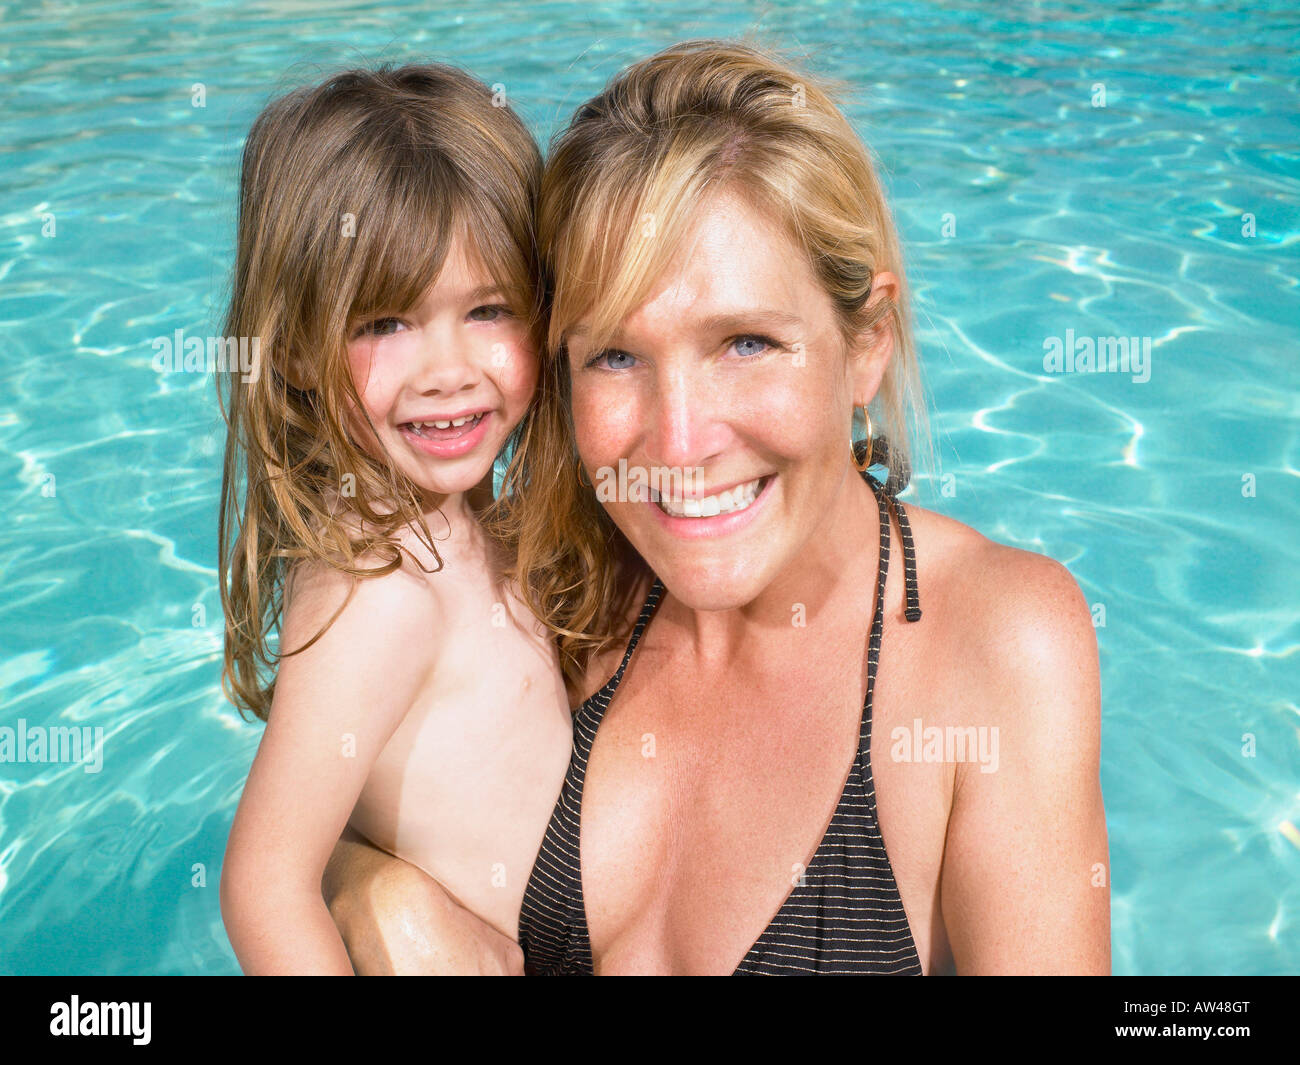 Mother and daughter in pool. Stock Photo